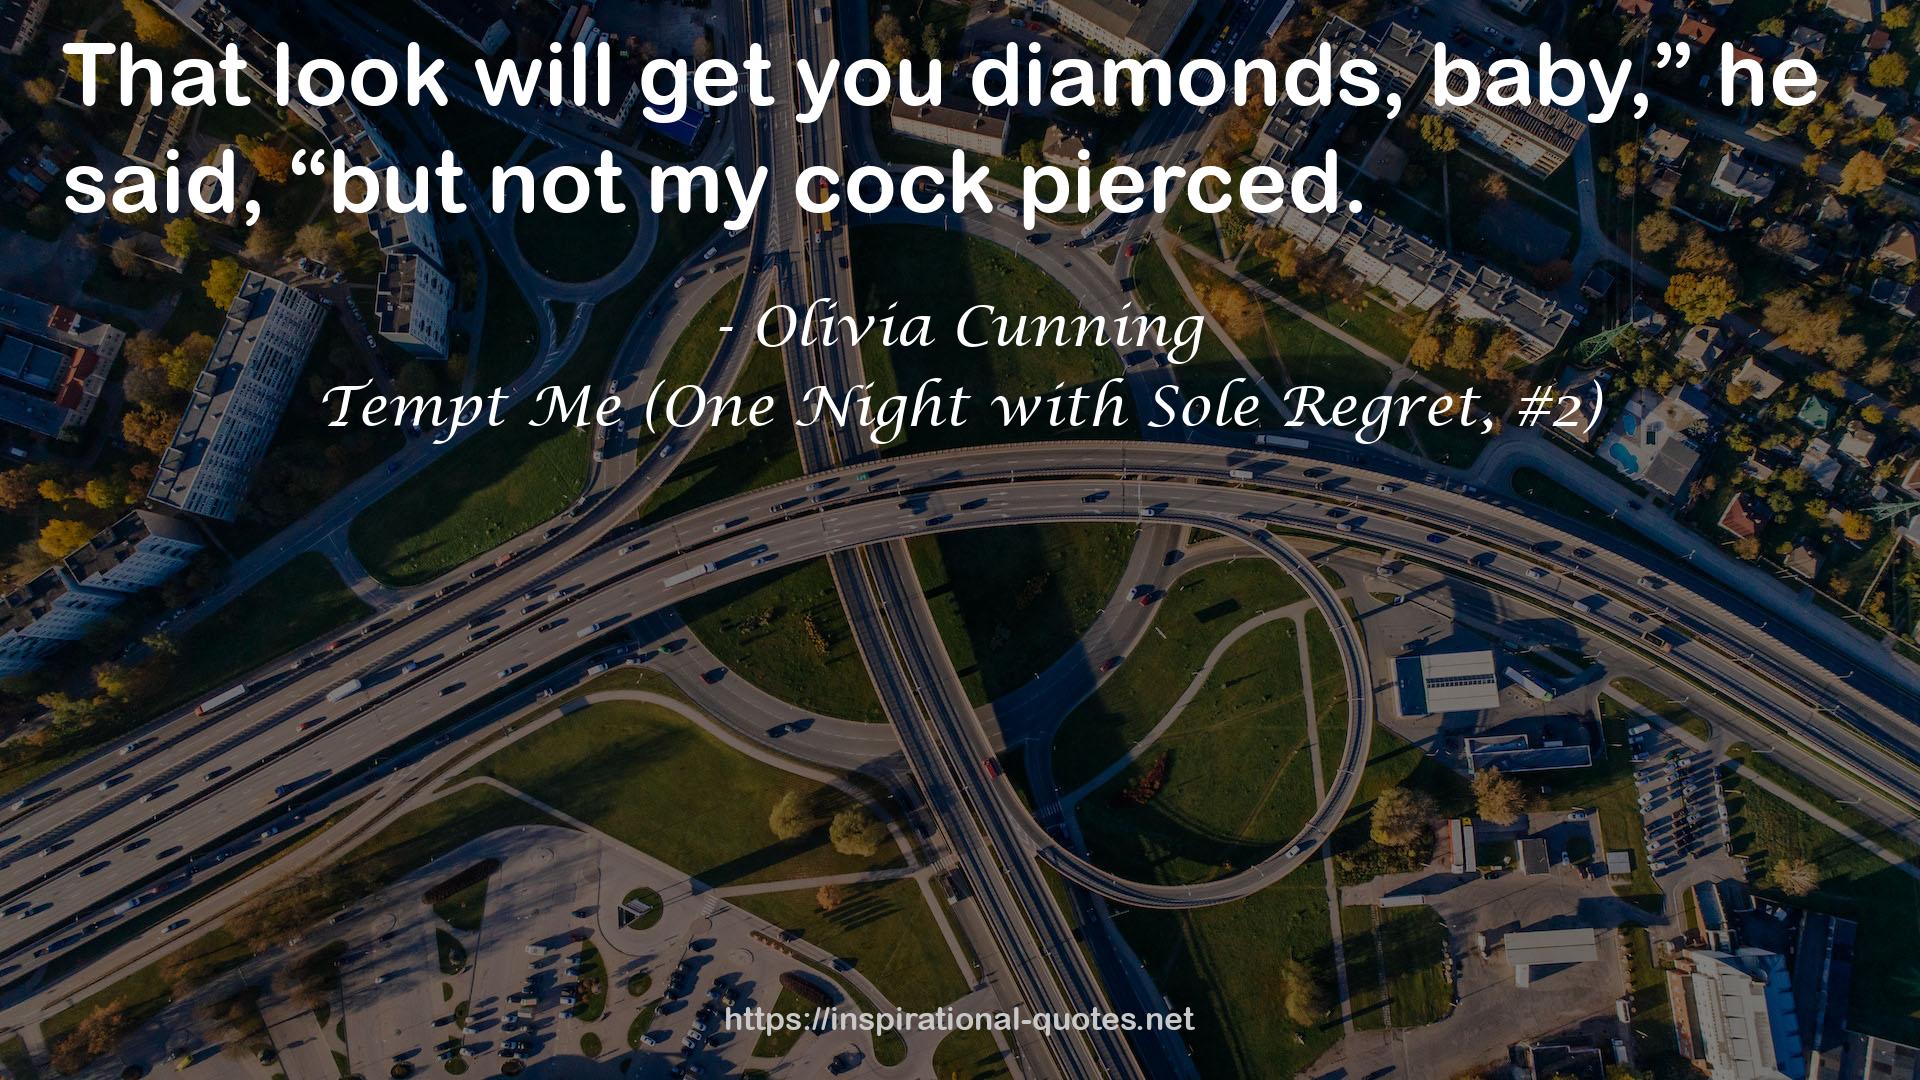 Tempt Me (One Night with Sole Regret, #2) QUOTES